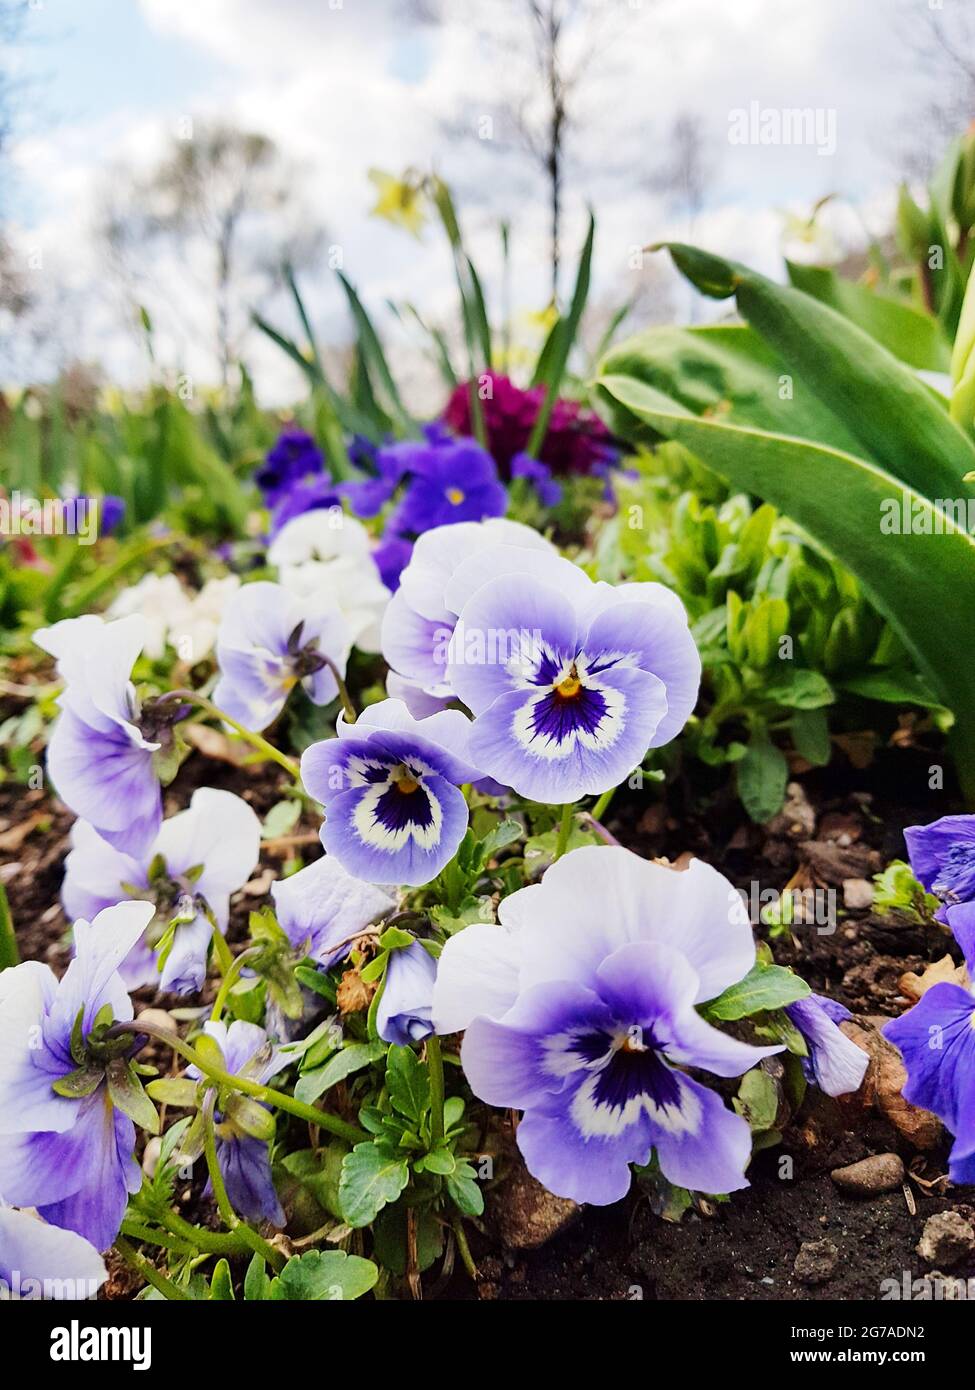 Pansies in the flowerbed Stock Photo